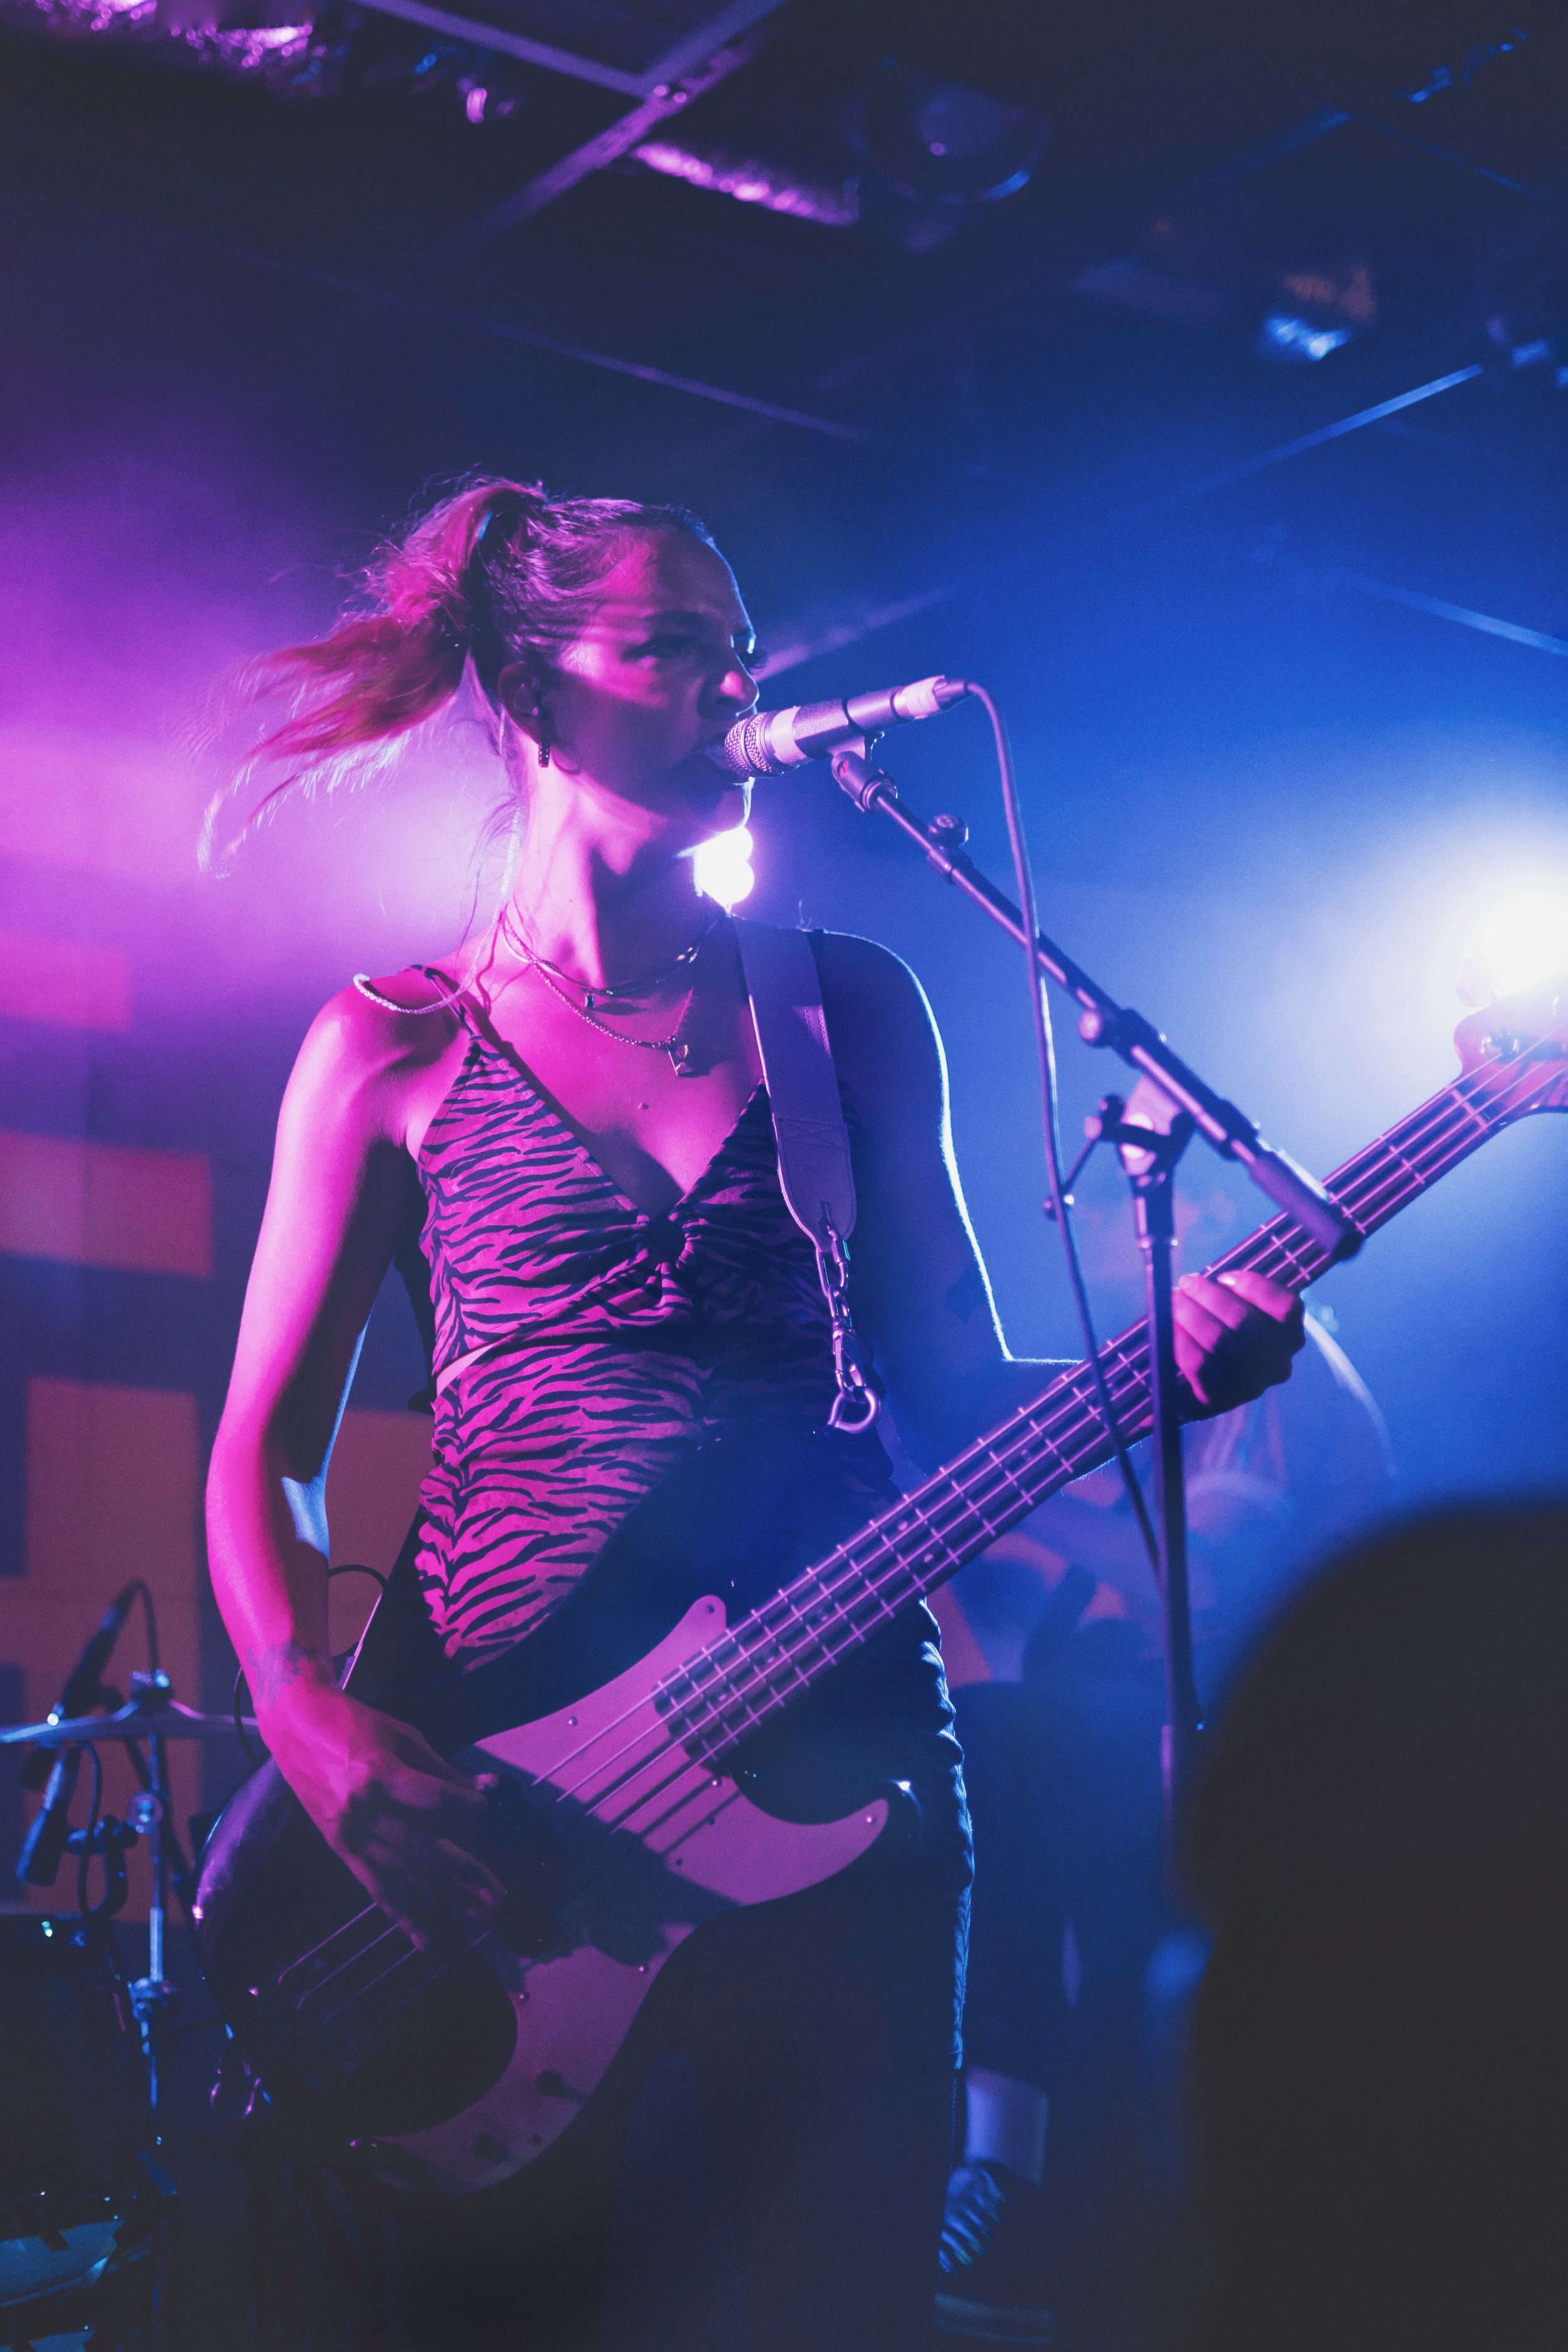  Jordan Miller, bassist and lead vocalist, adds grit to her stage presence while singing. 